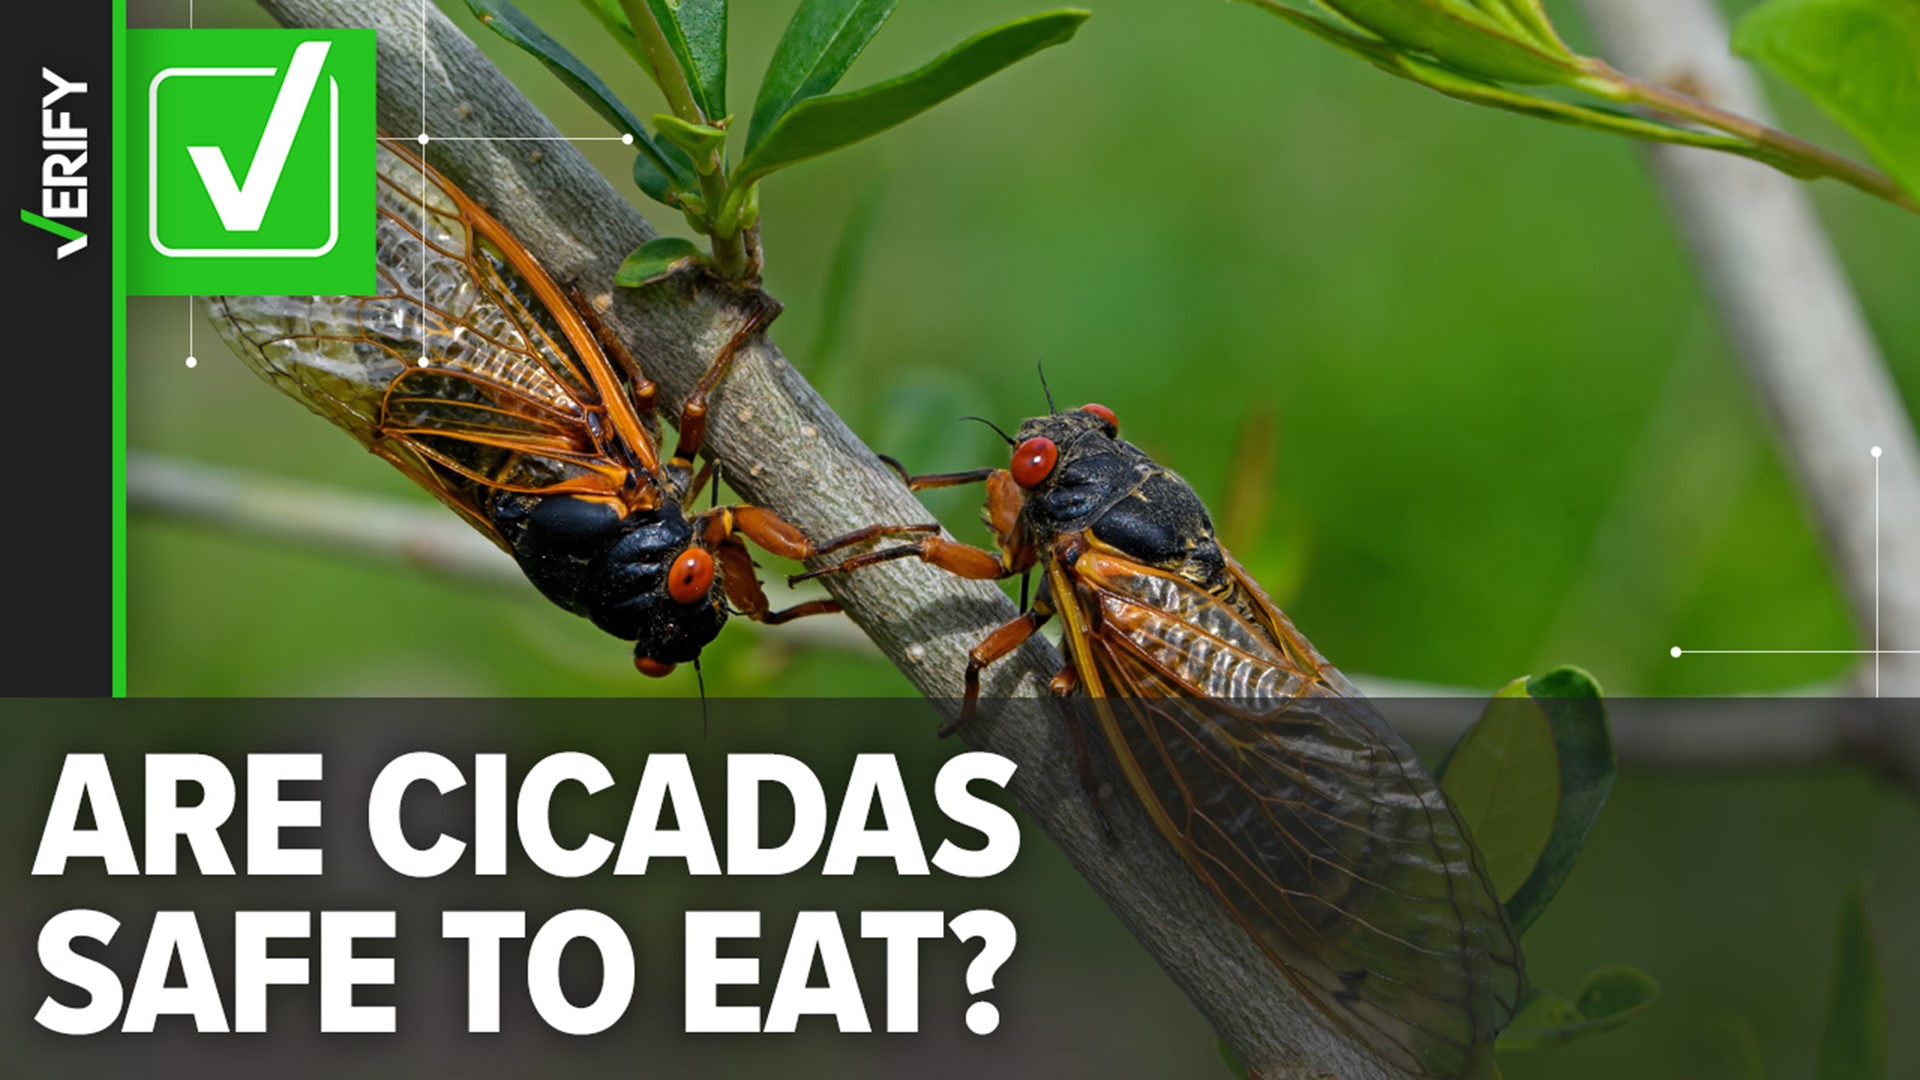 Fearless foodies, listen up: Cicadas are indeed edible, and there are recipes available online. Now whether or not you decide to indulge is up to you.